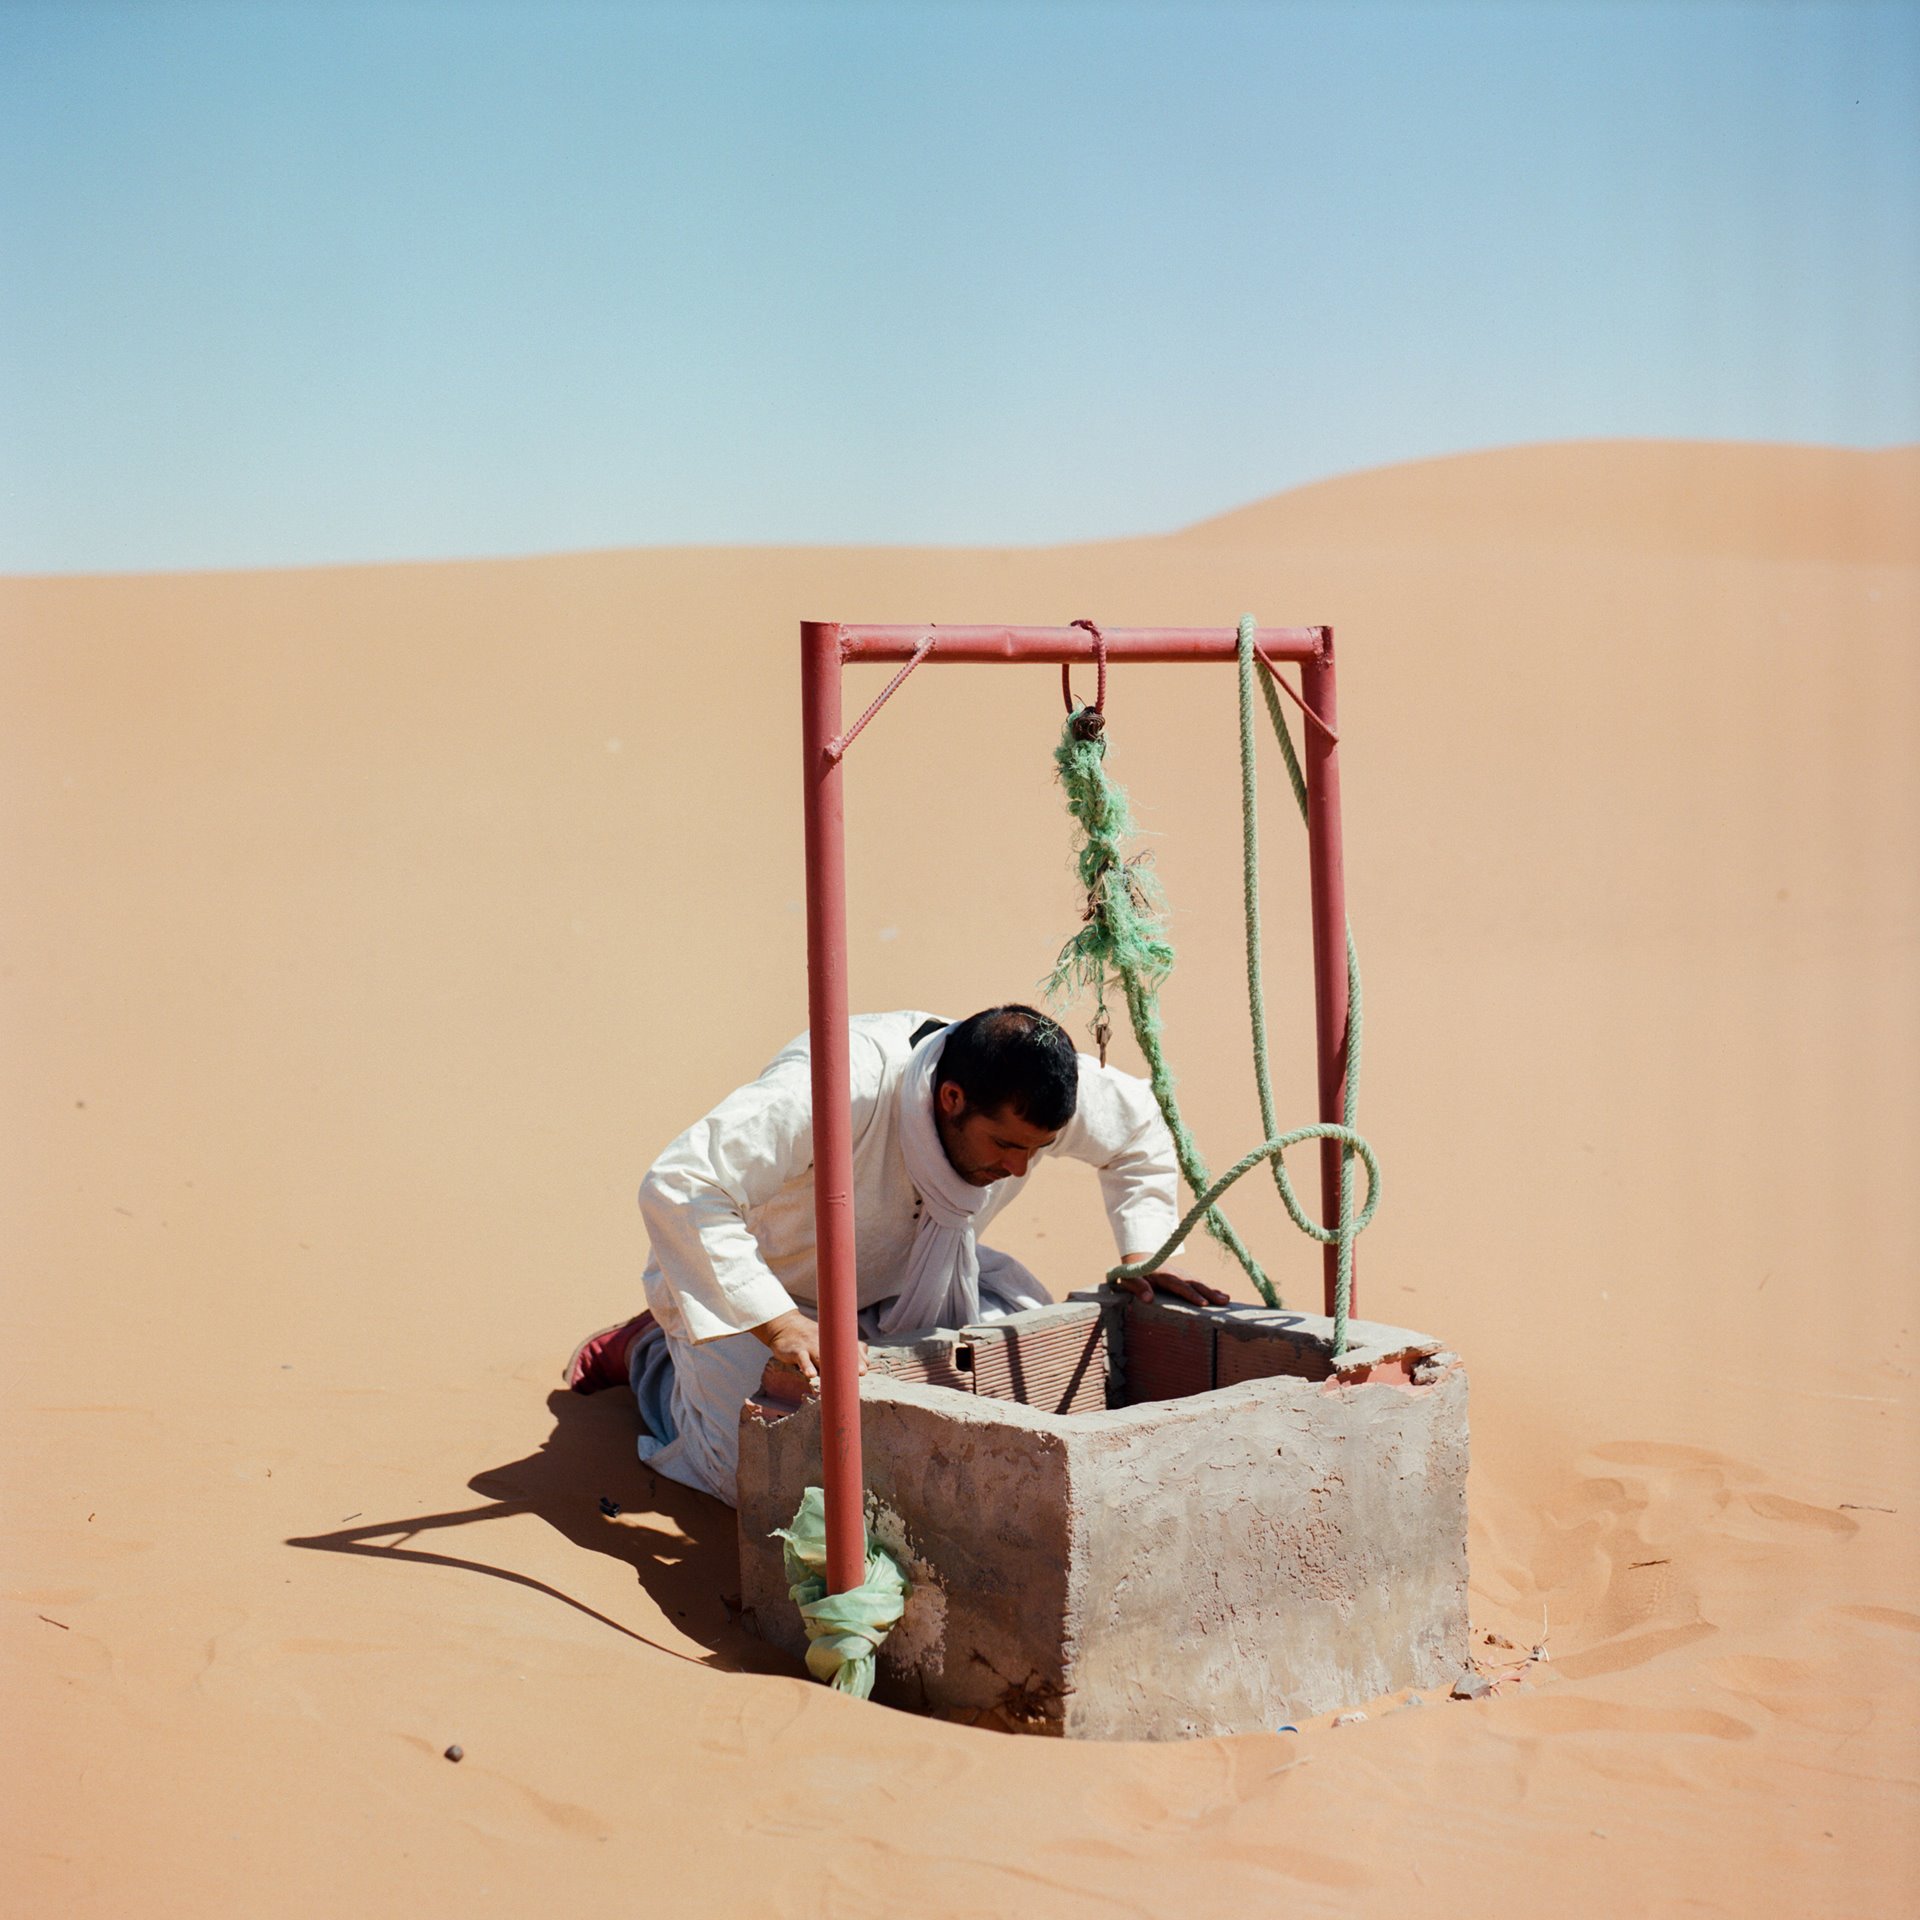 <p>A man checks the water level of a well at Merzouga Oasis, in eastern Morocco. Deep wells can deplete the water table, leaving farmers without a water supply.</p>
